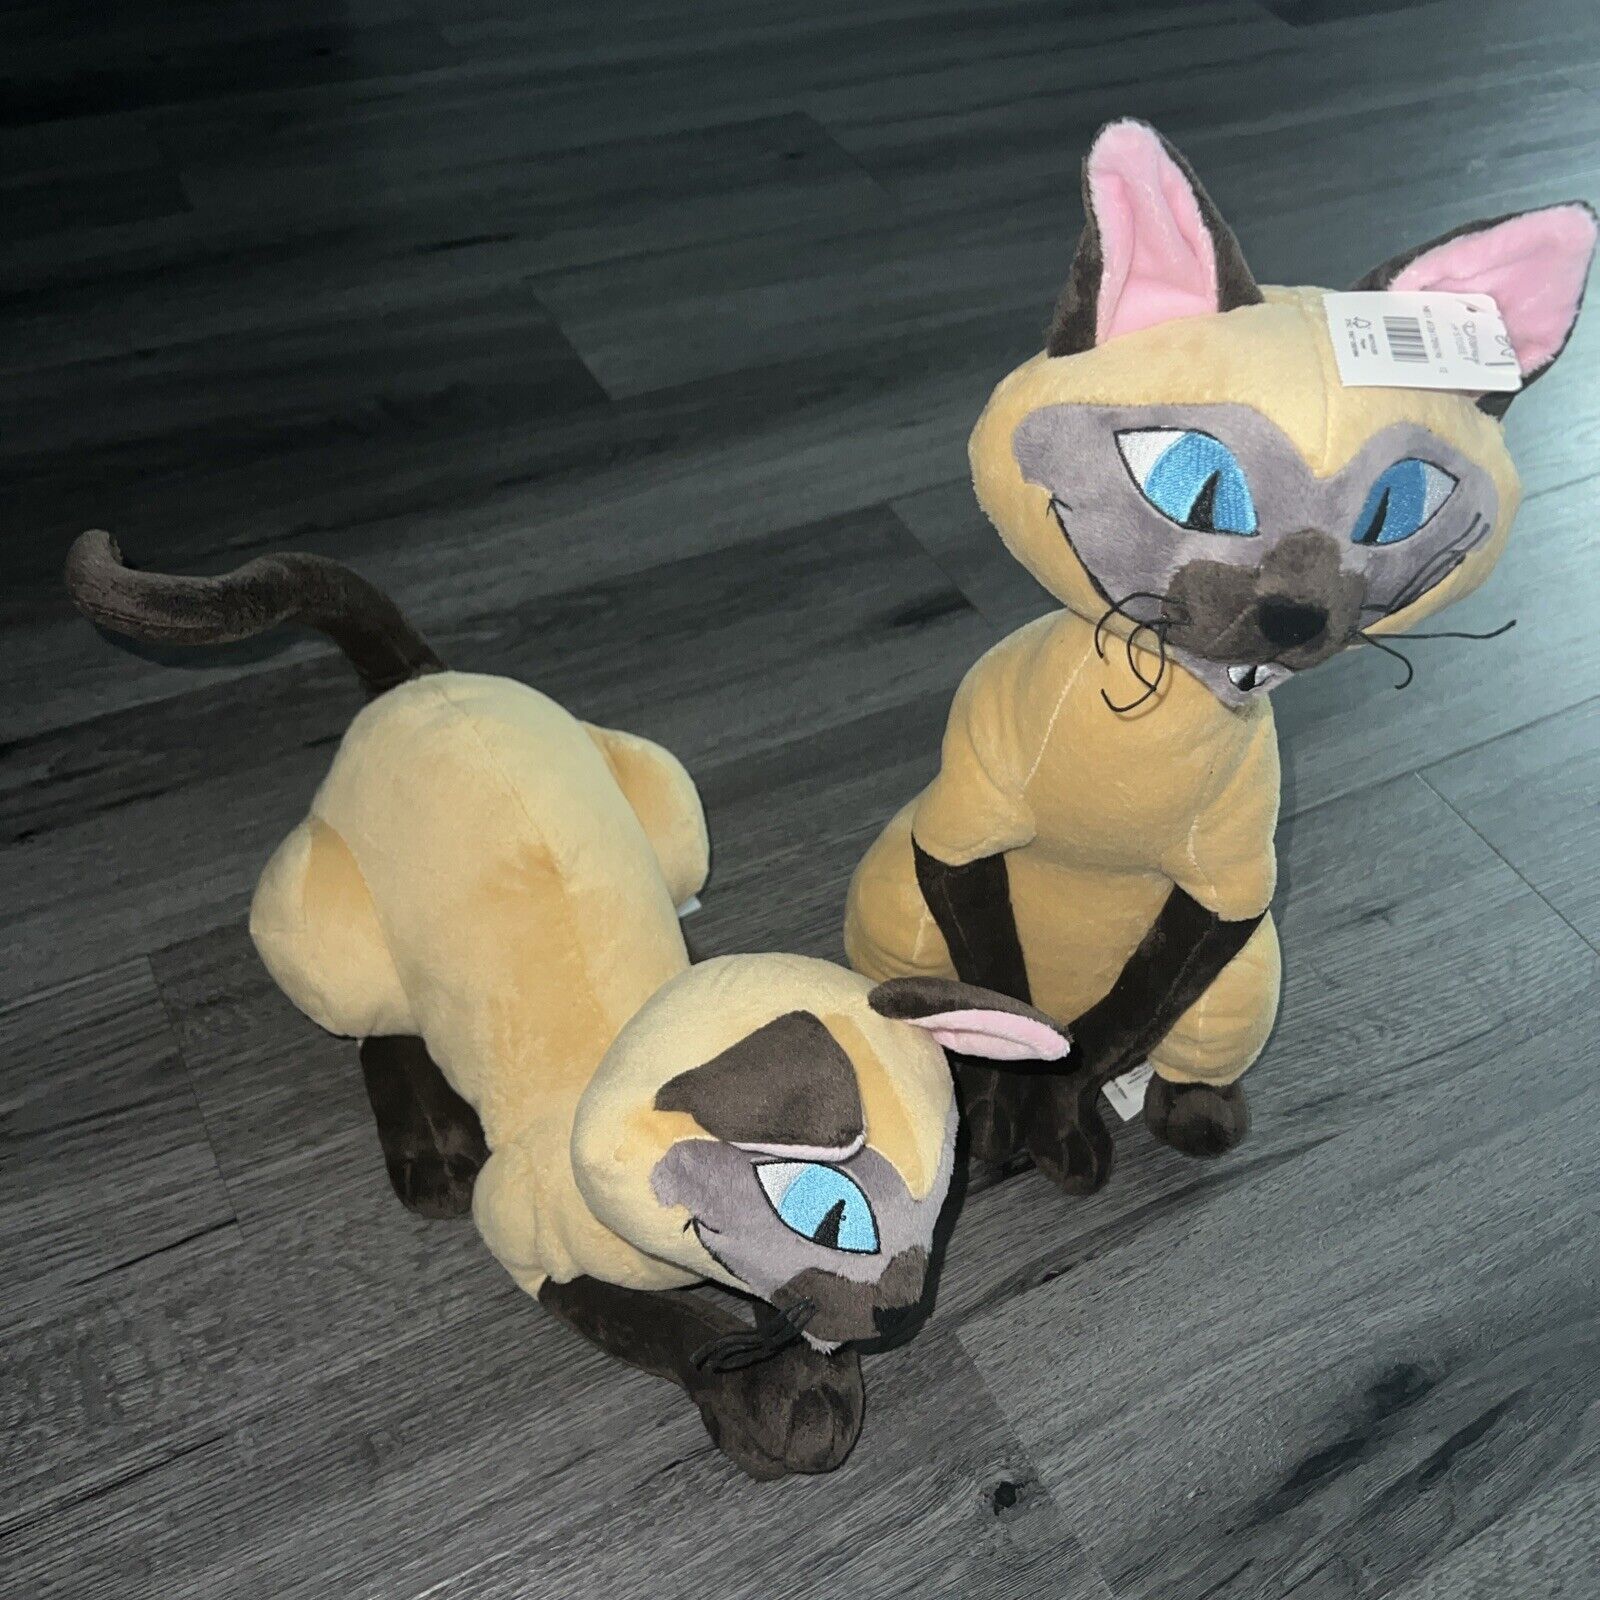 16” Original Siamese Cat From Lady  Tramp Disney Store Plush Si And Am